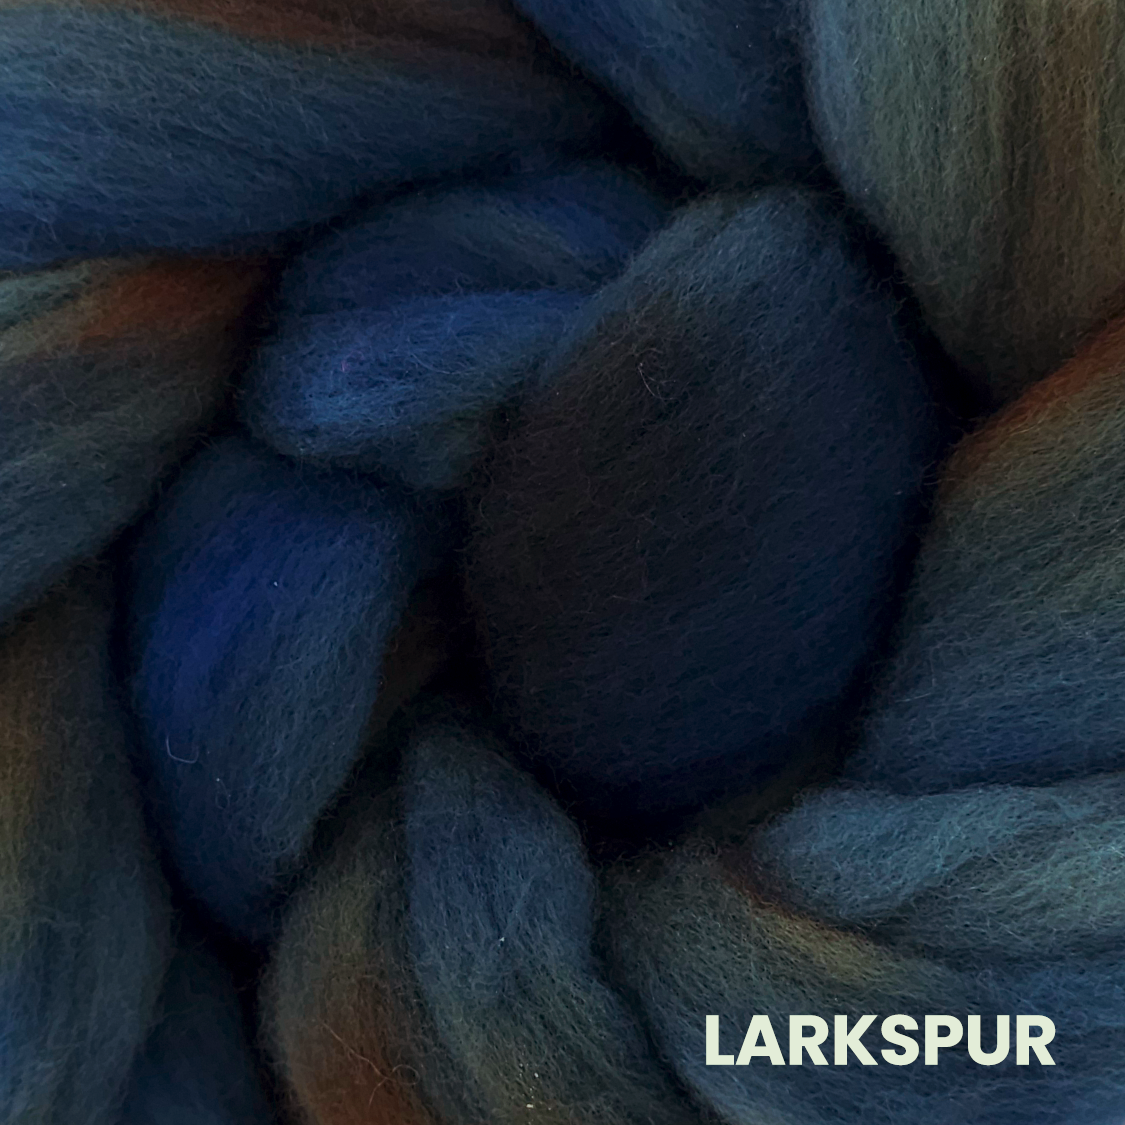 FLOOF! Kits | Hand Dyed BFL Fiber and Drop Spindle Kit